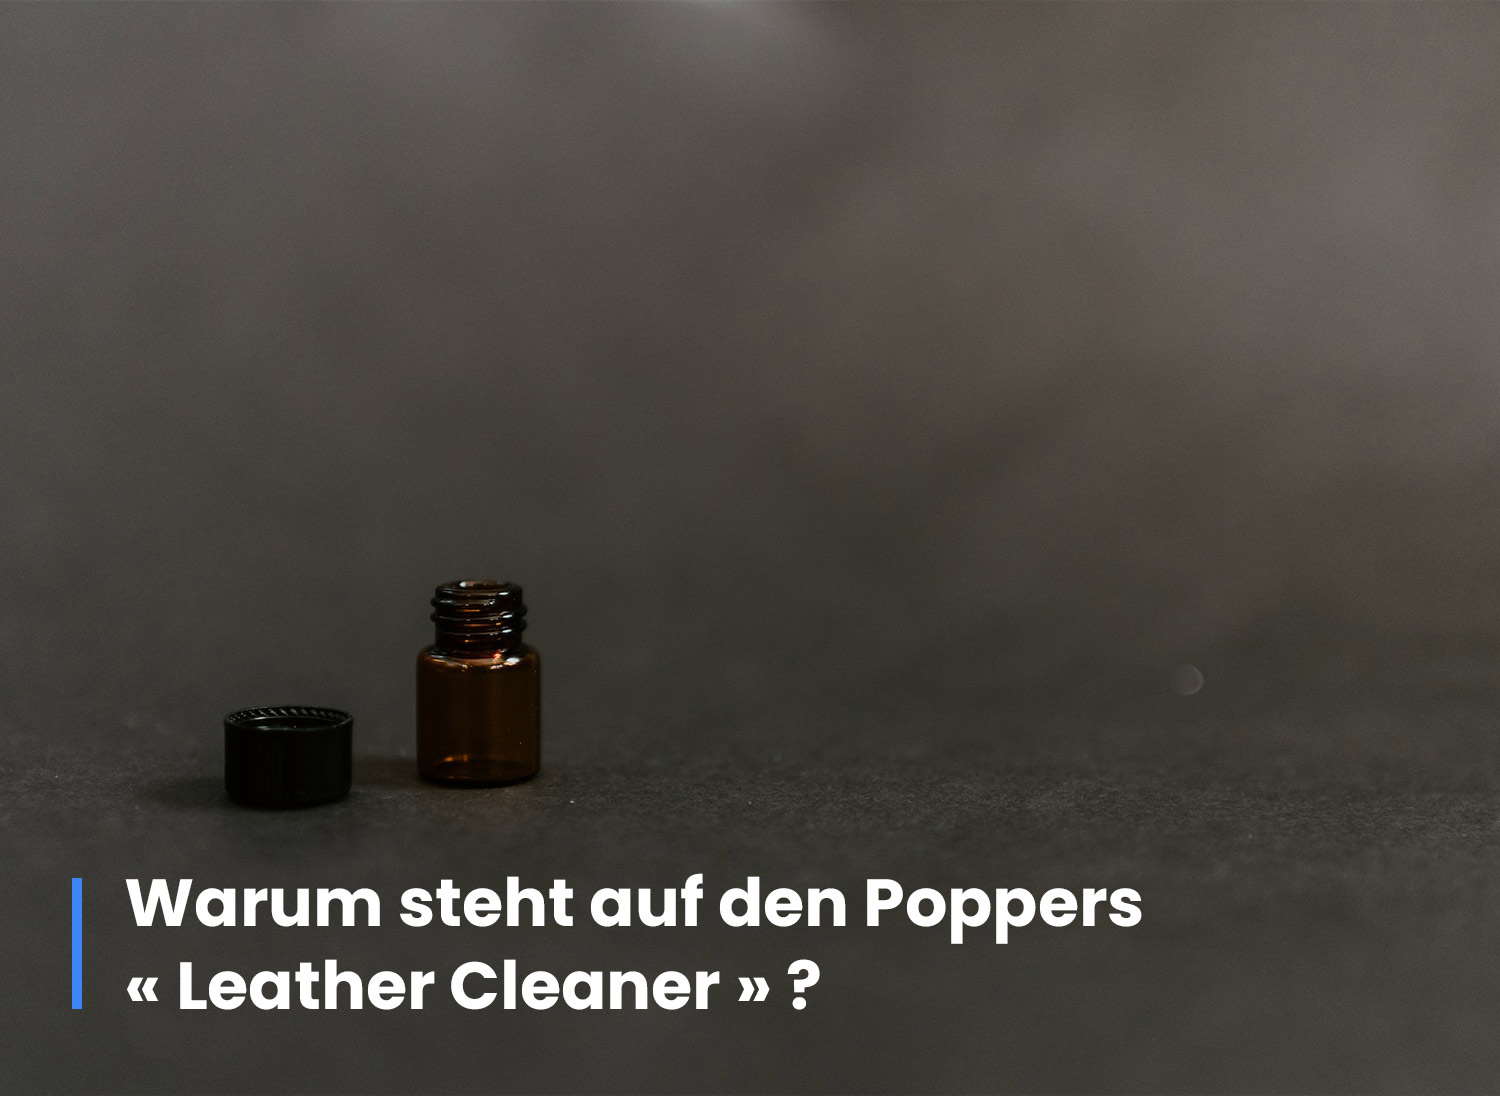 You are currently viewing Warum steht auf den Poppers « Leather Cleaner » ?